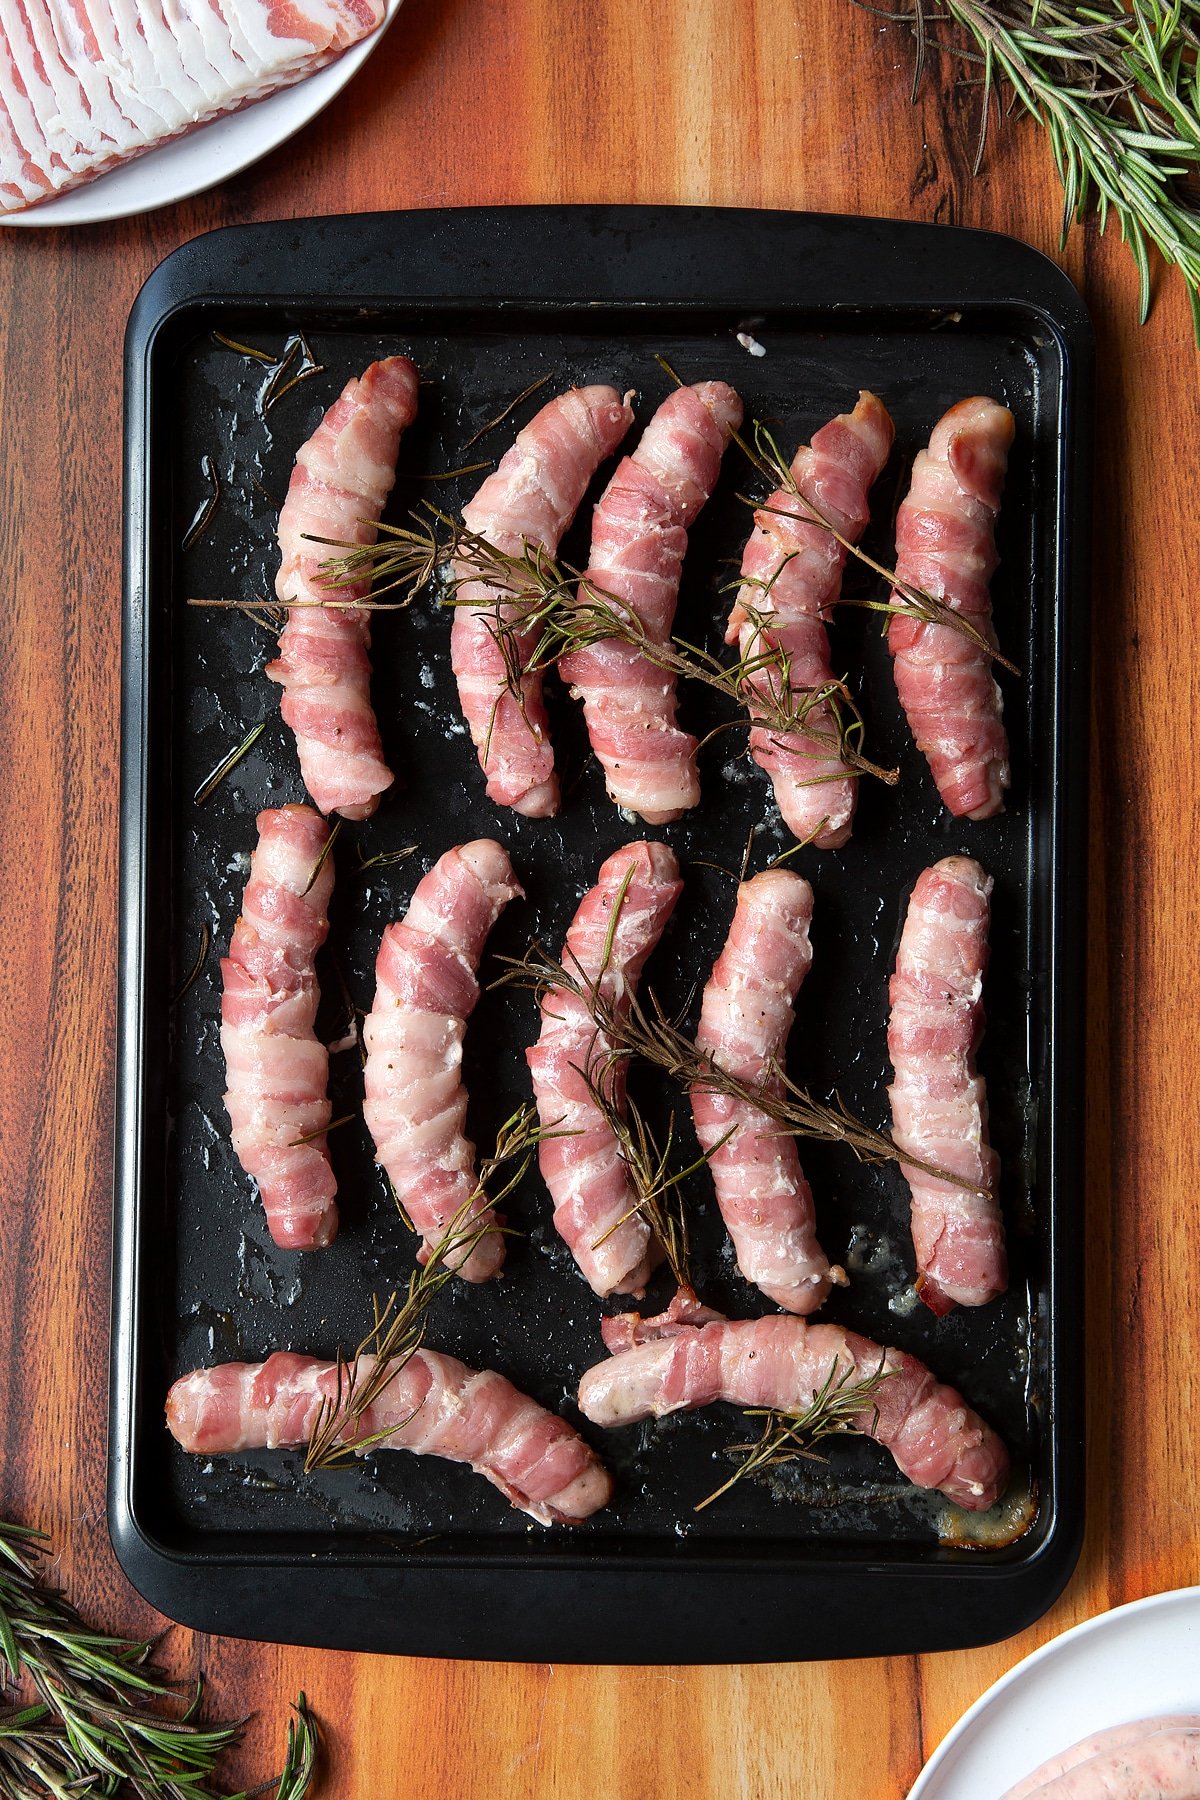 Overhead shot of bacon-wrapped sausages with rosemary on top in a black tray